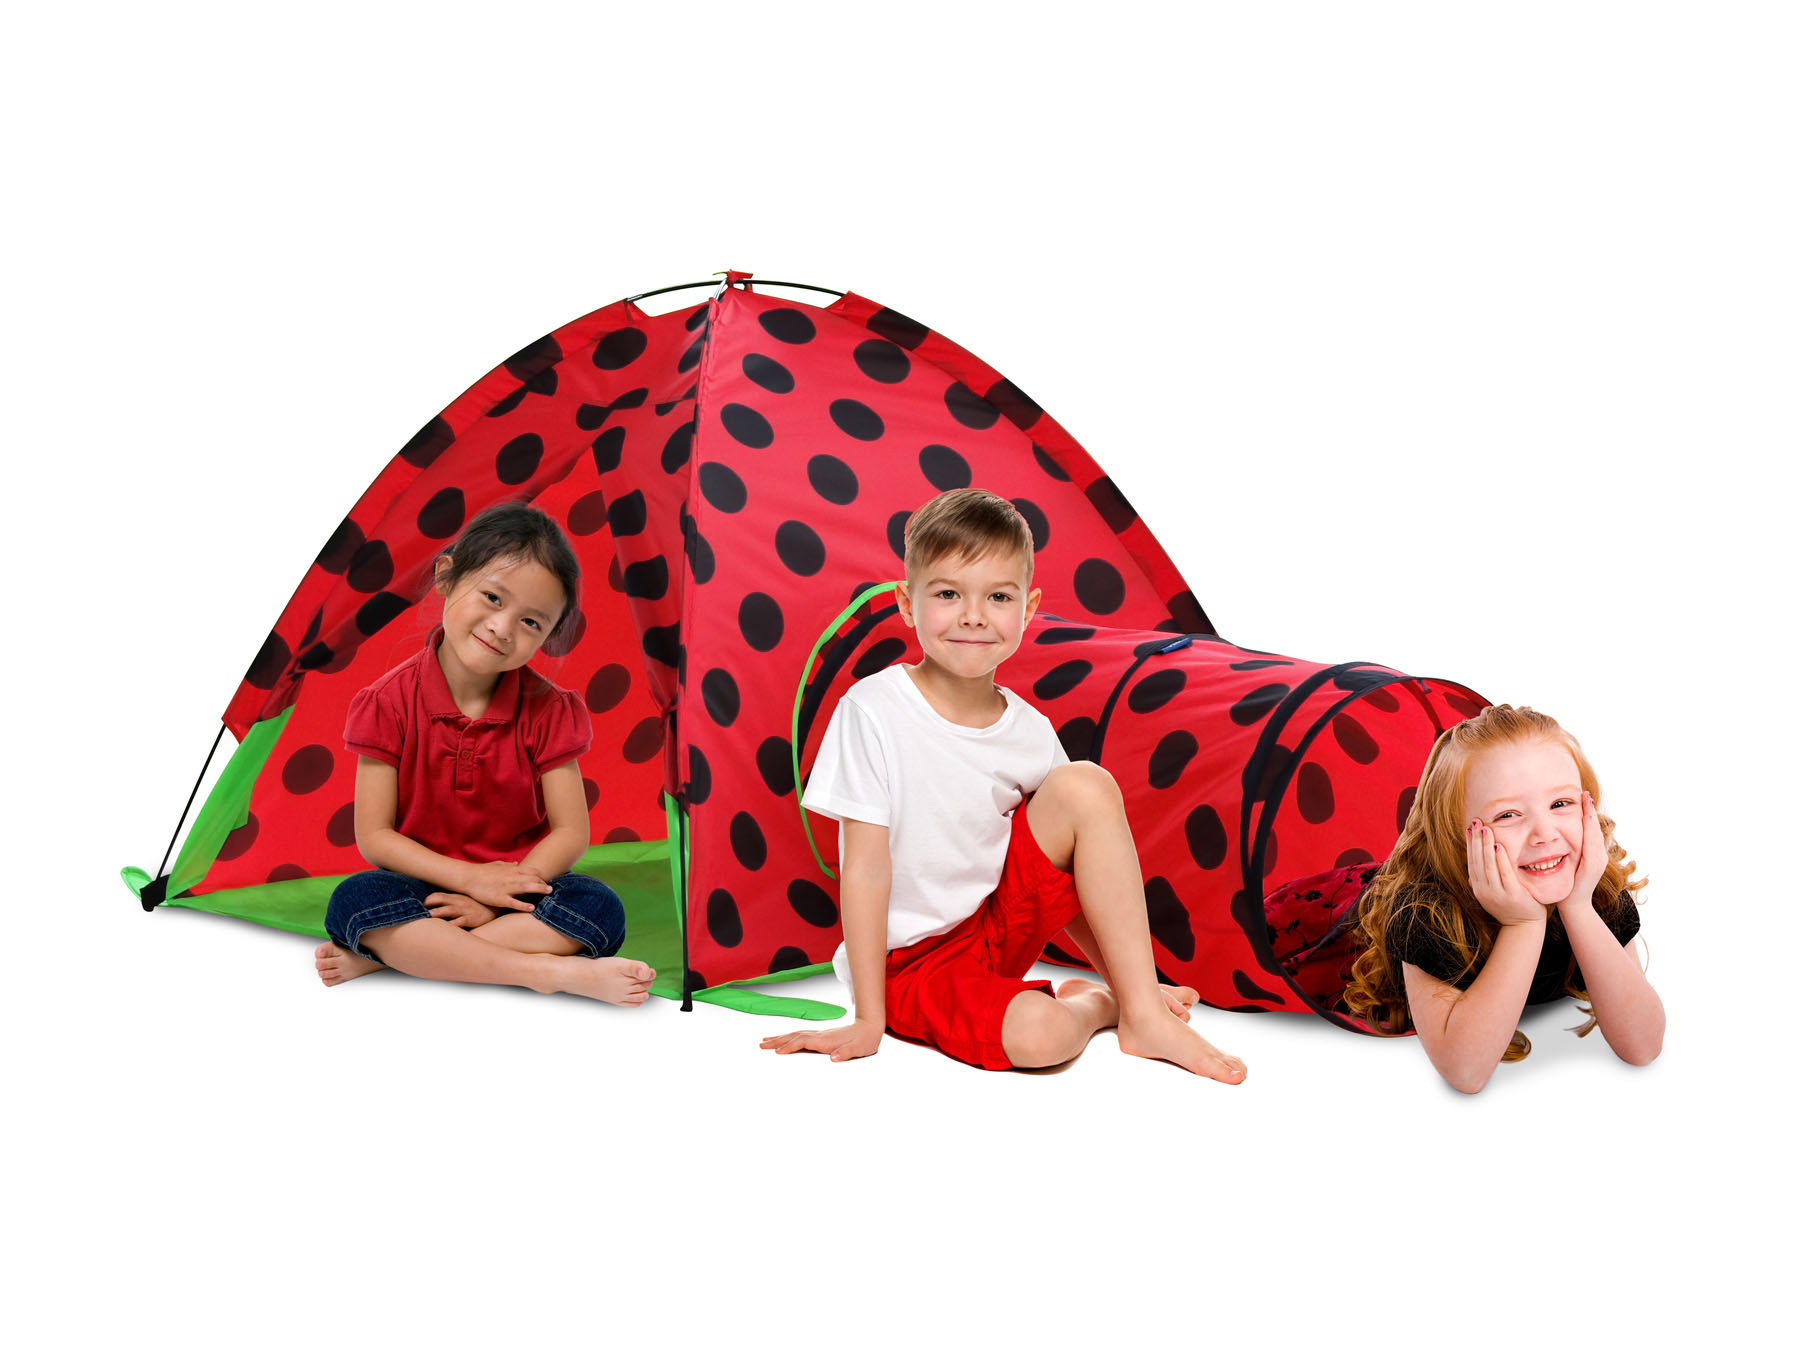 GigaTent Lady Bug Attachable Play Tunnel Fiberglass Poles Polyester Play Tent, Multi-color - image 1 of 2